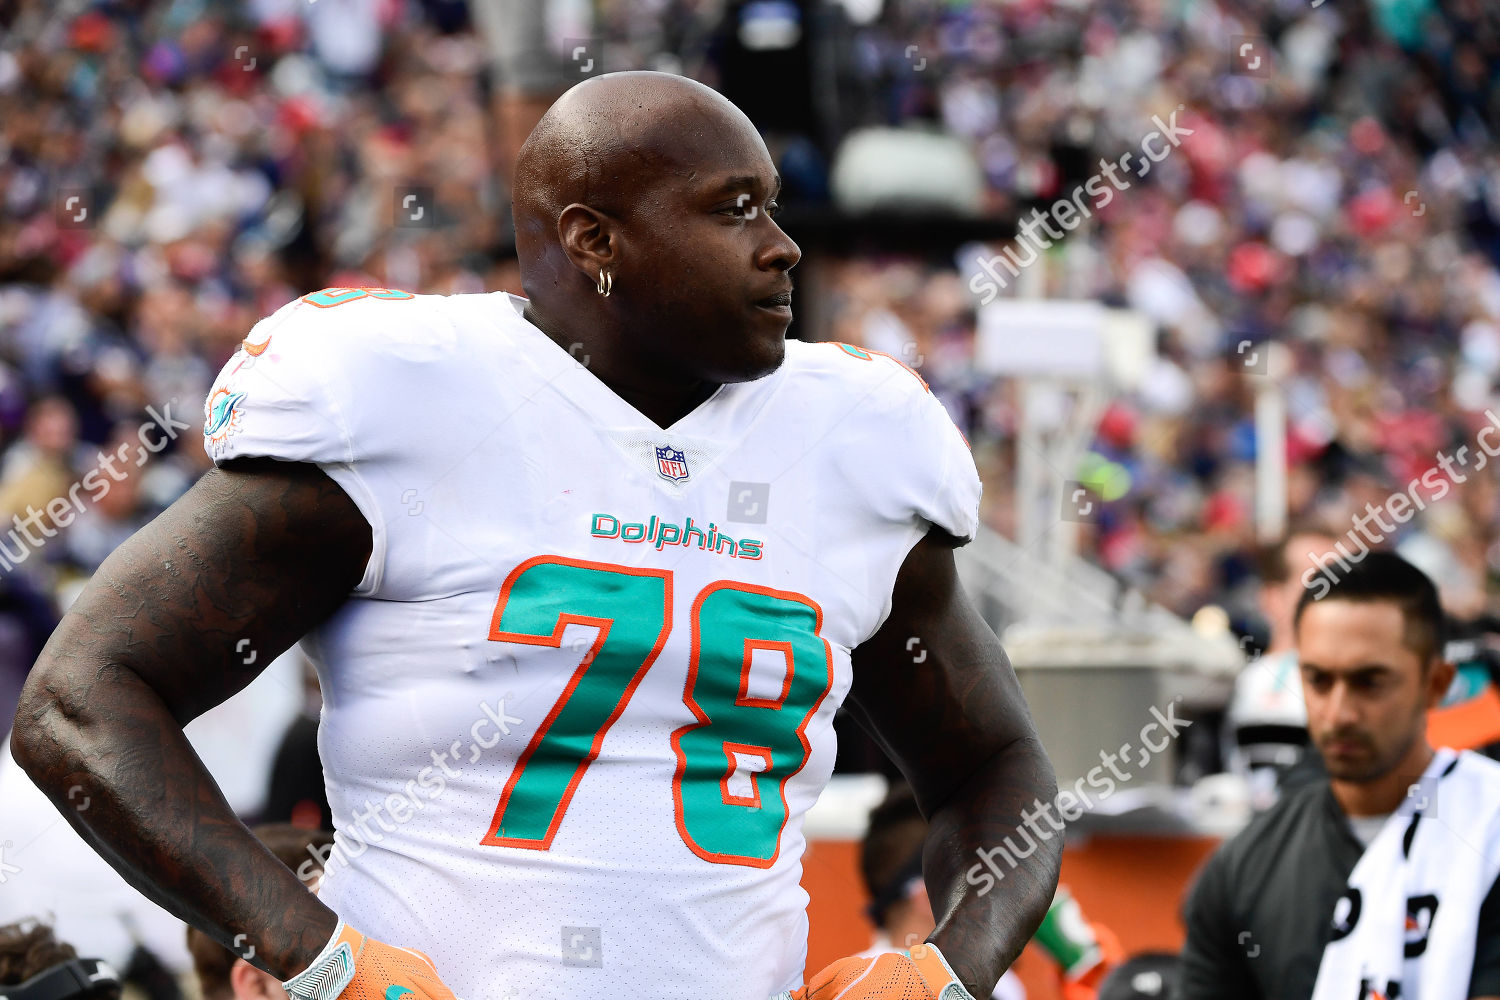 miami dolphins tunsil jersey